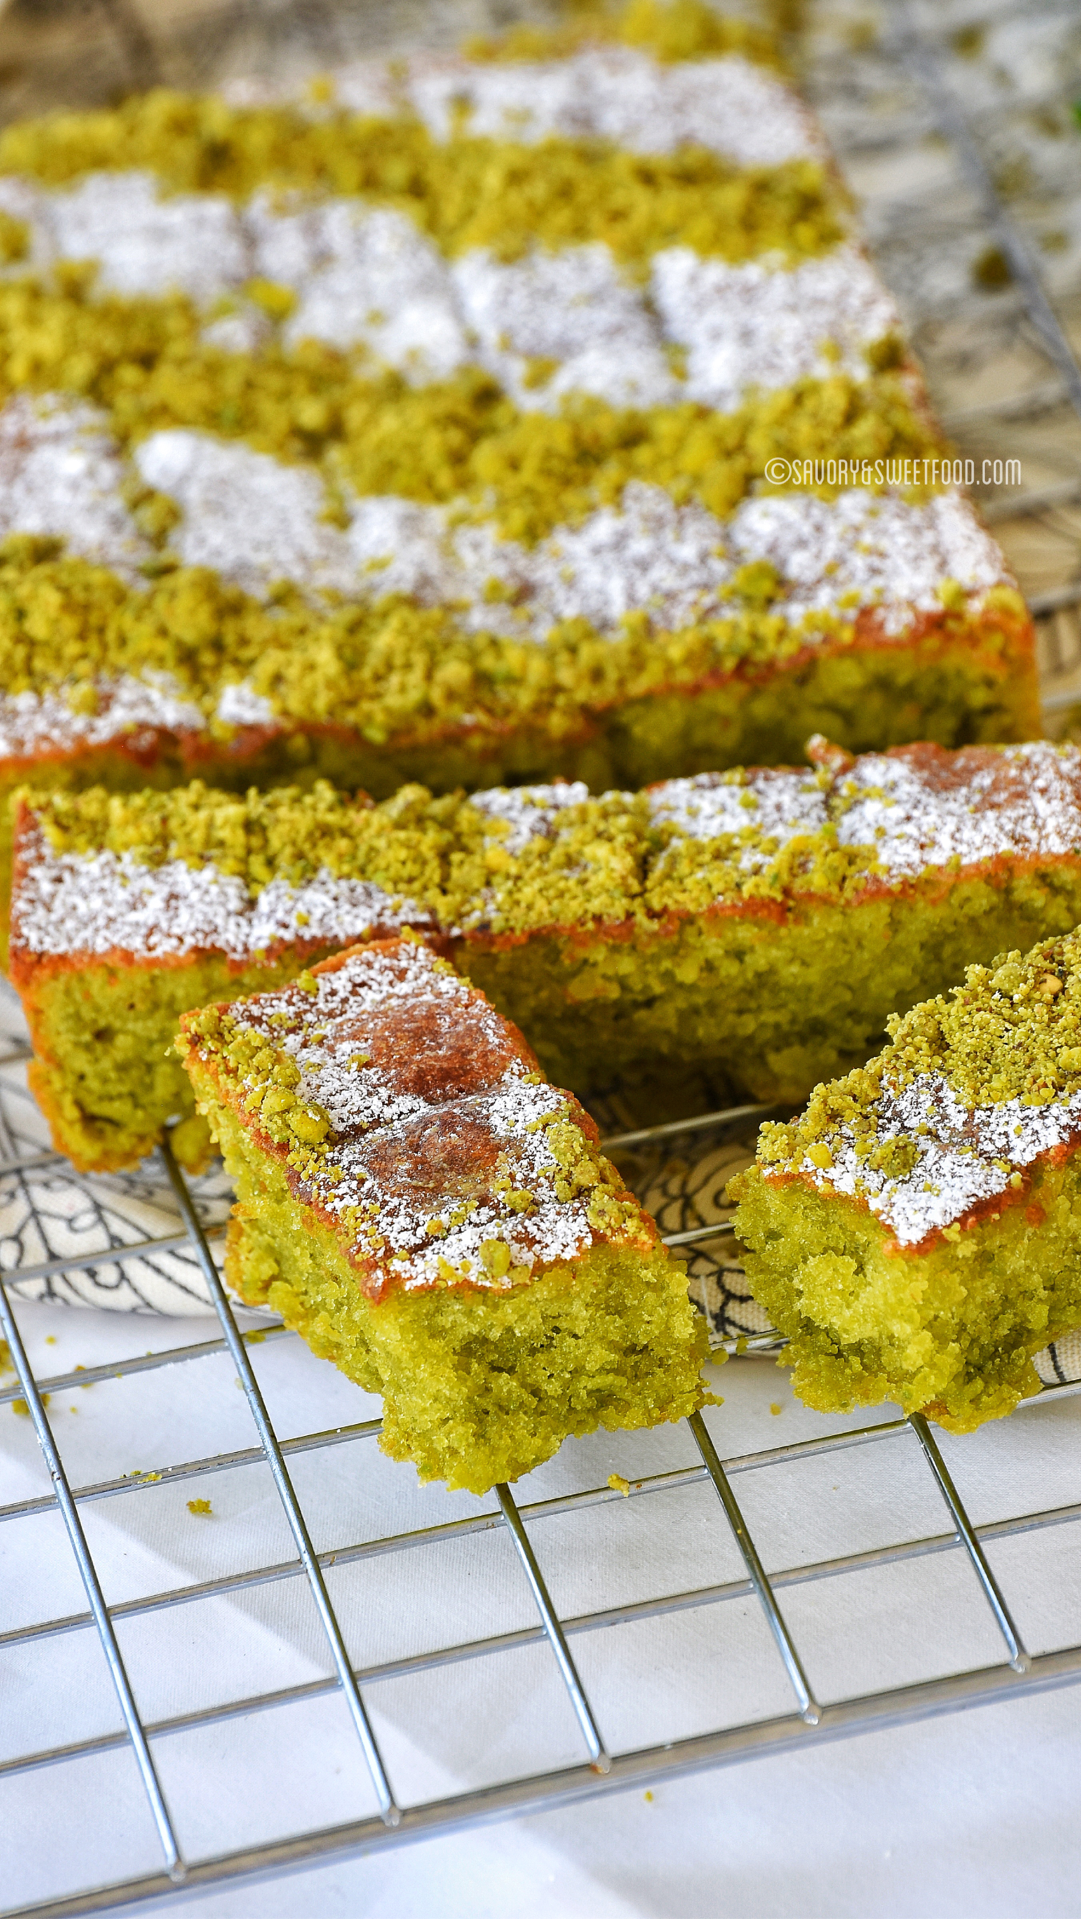 Italian Pistachio Cake with White Chocolate and Cardamom - The Classy Baker